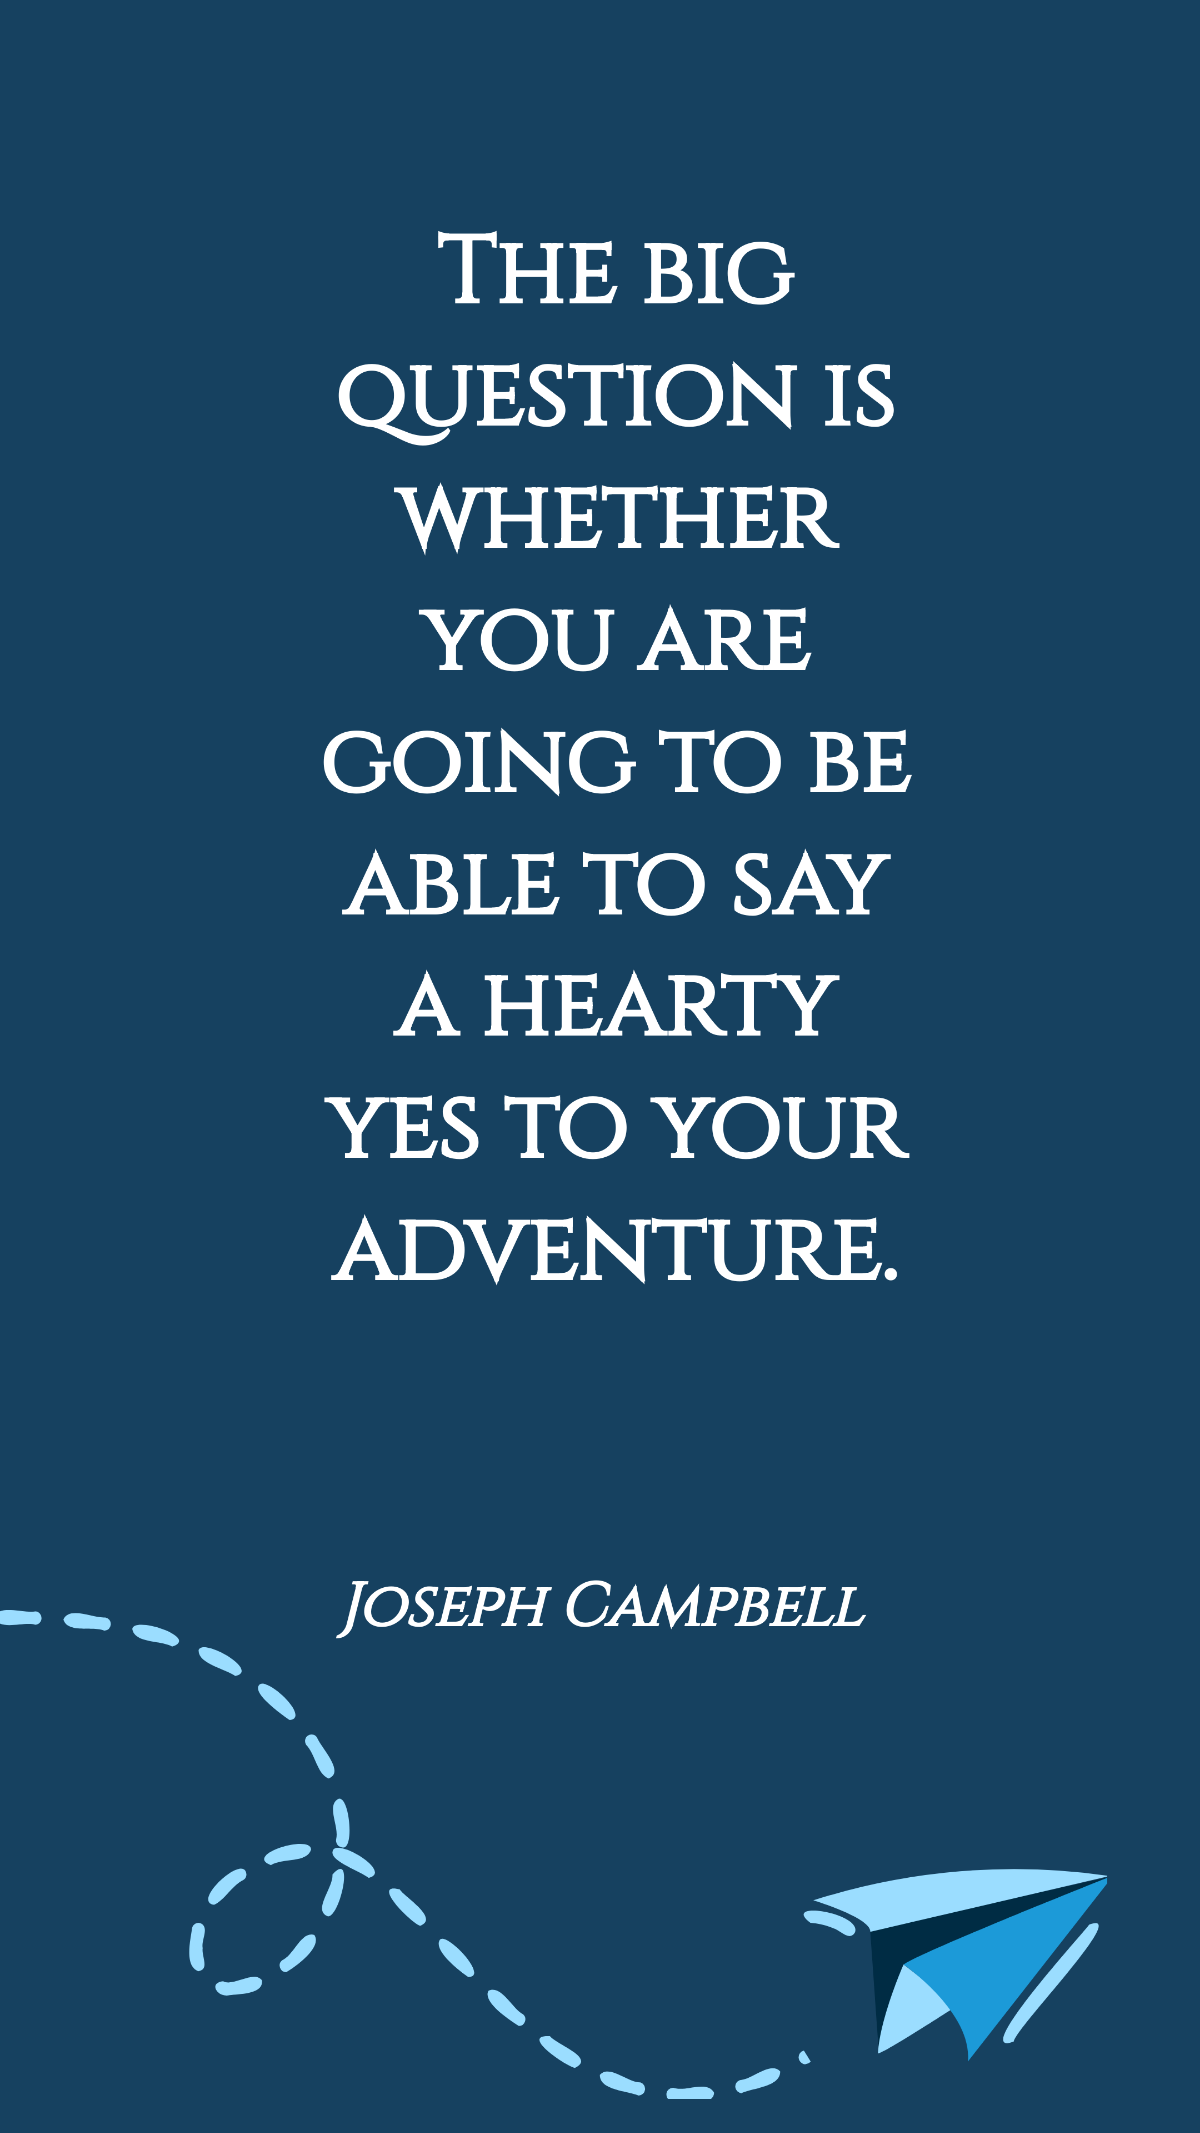 Joseph Campbell - The big question is whether you are going to be able to say a hearty yes to your adventure. Template